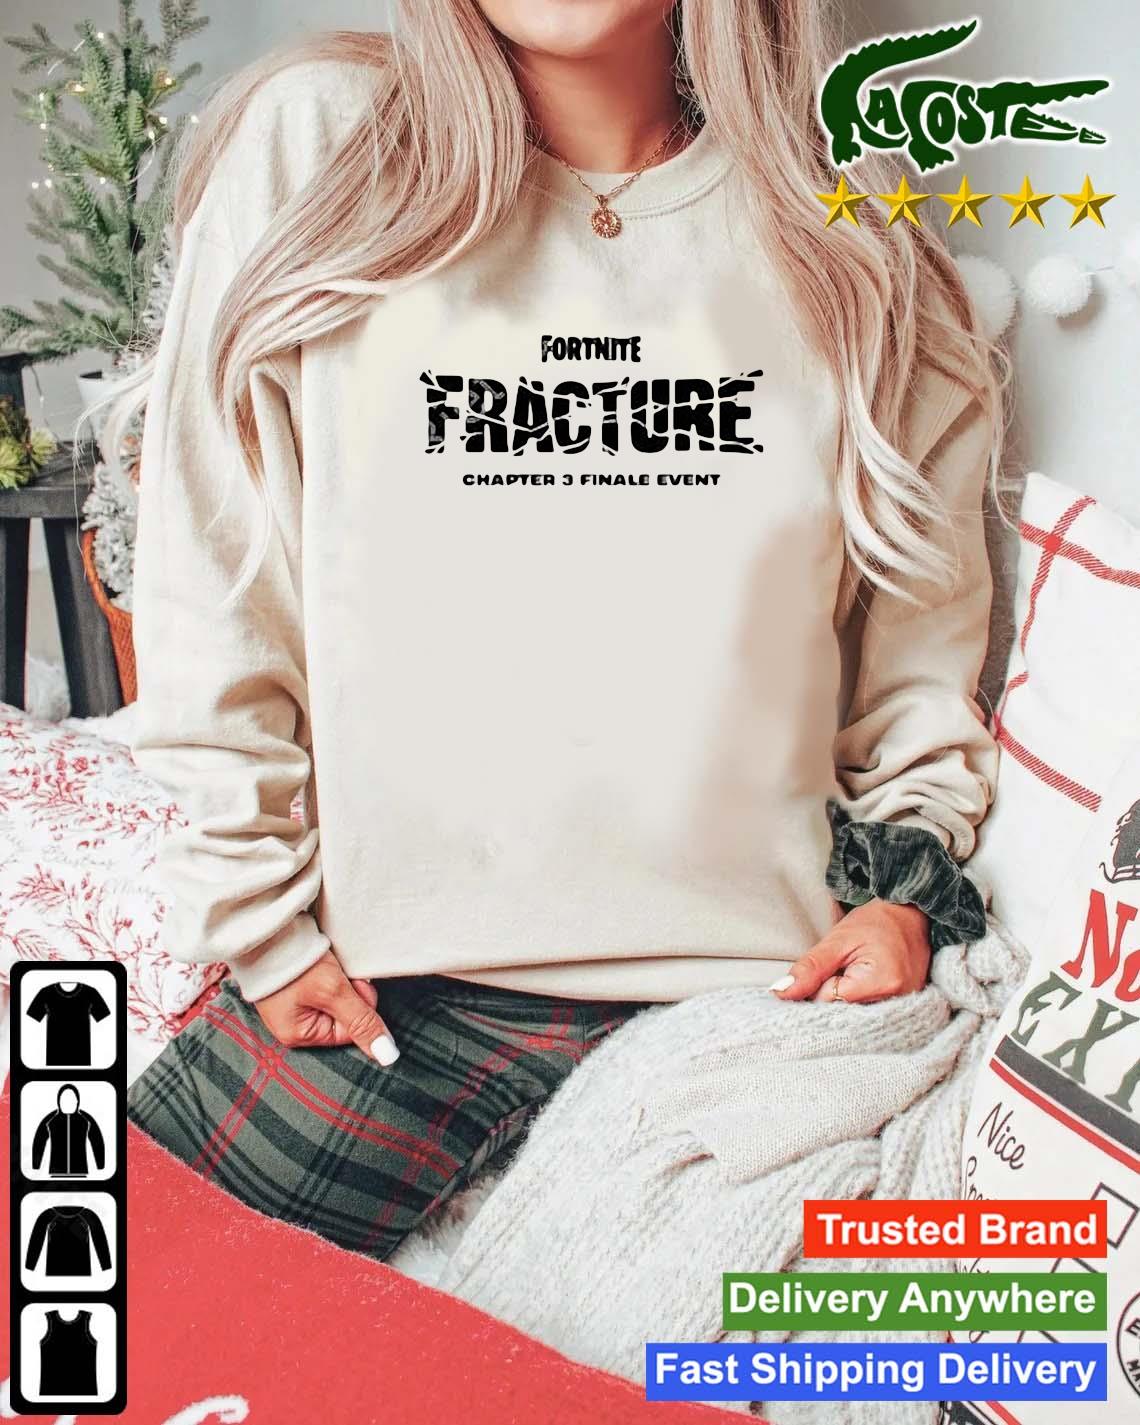 Fortnite Fracture Chapter 3 Finale Event Long Sleeves T Shirt Mockup Sweater